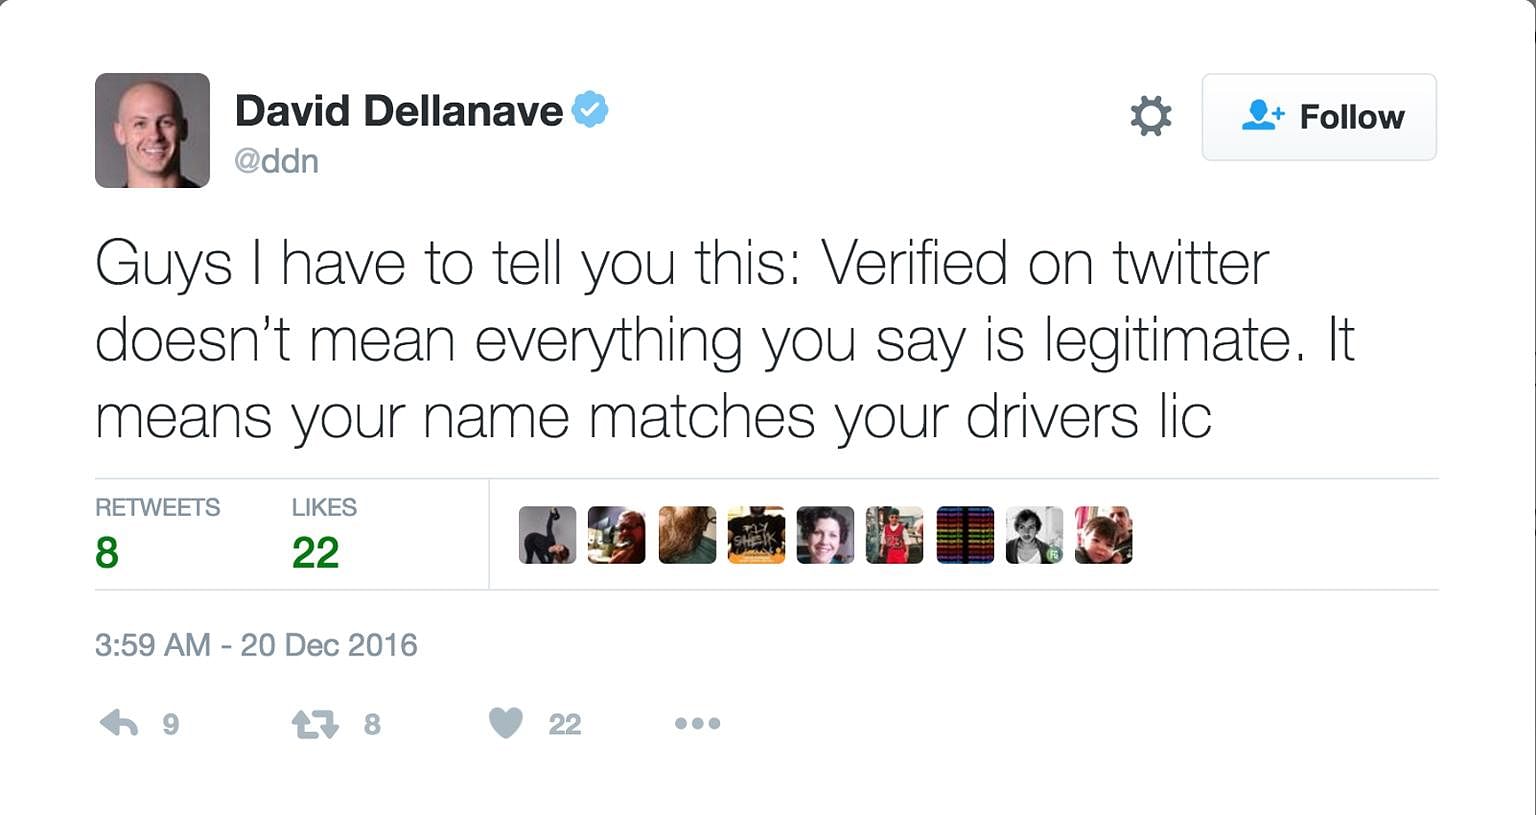 David Dellanave tried to defend his retweeting of fake news about a stadium being opened to the homeless in Minneapolis.